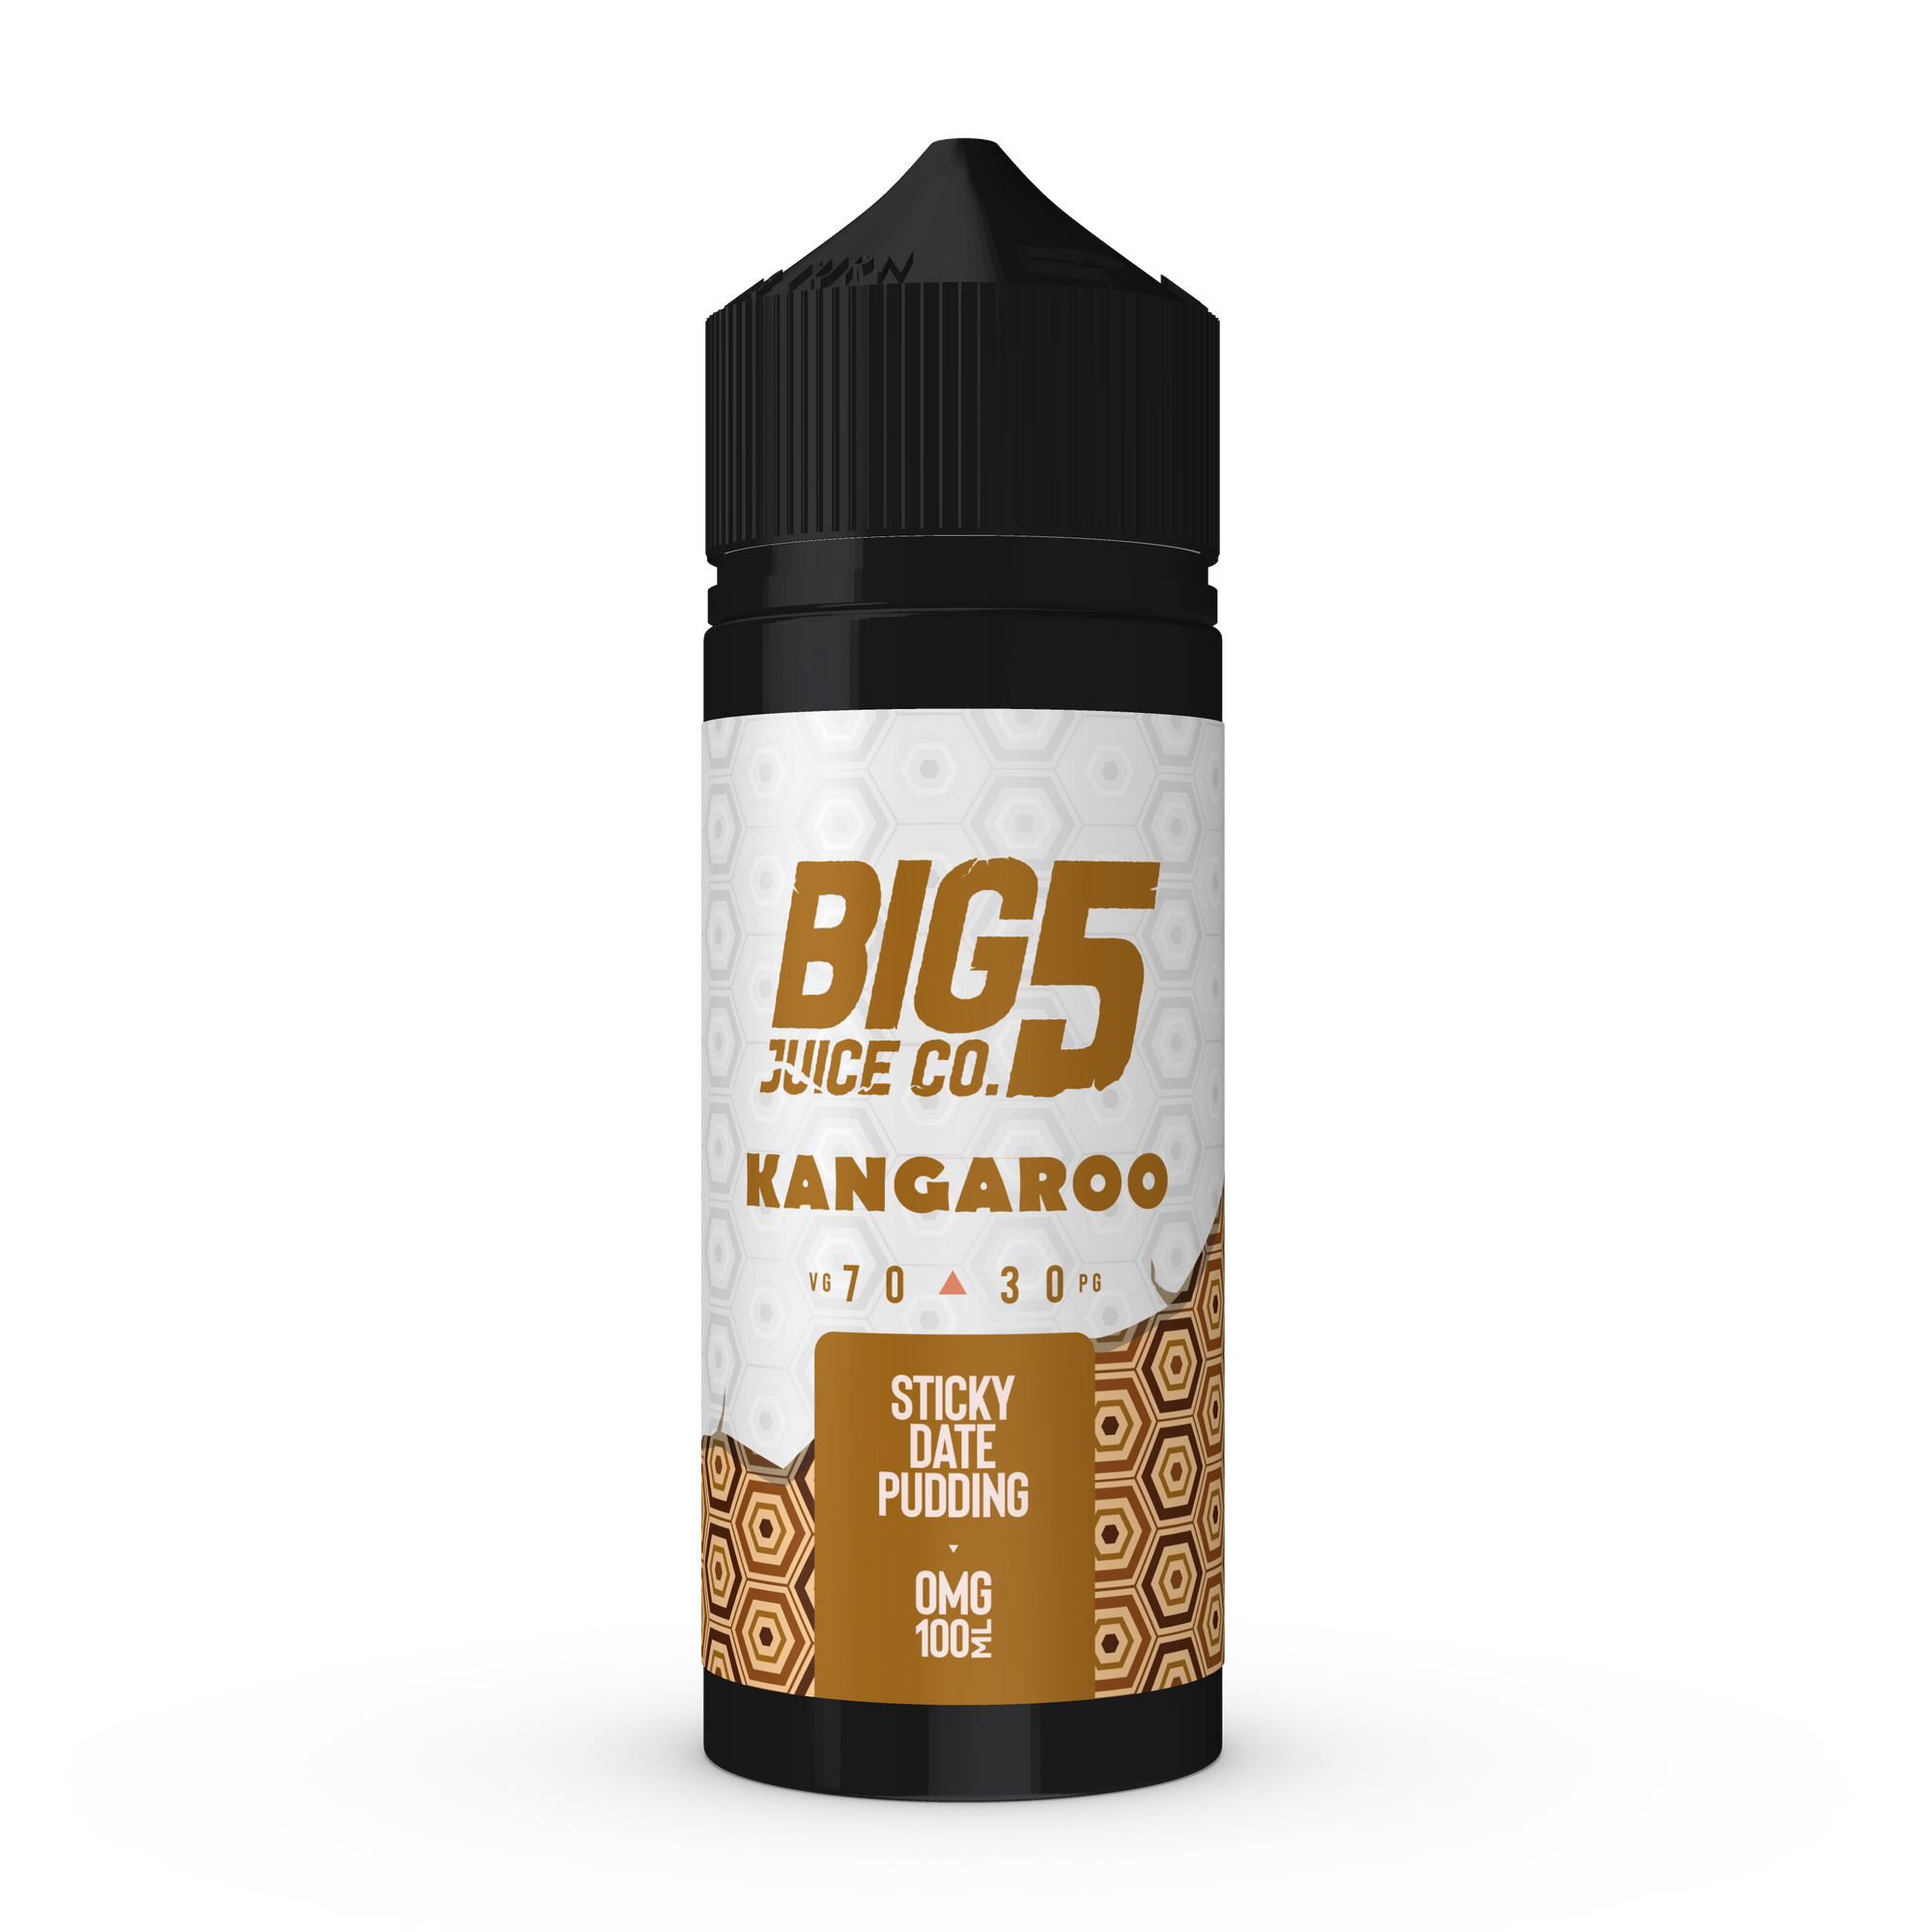 Buy Kangaroo – Sticky Date Pudding By Big 5 Juice Co - Wick And Wire Co Melbourne Vape Shop, Victoria Australia